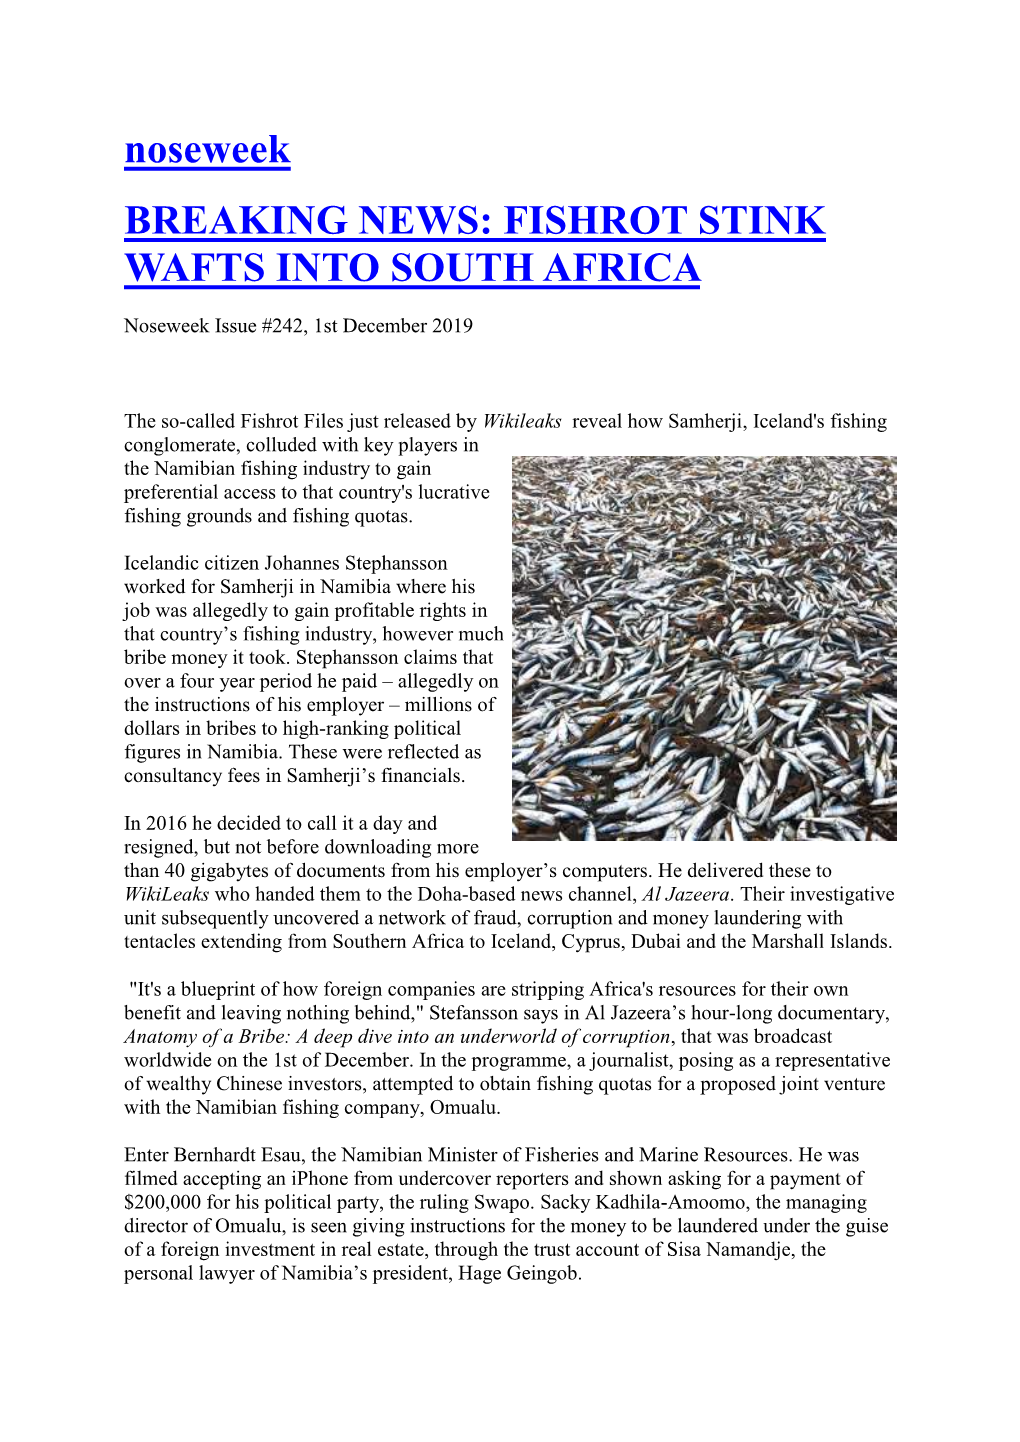 Noseweek BREAKING NEWS: FISHROT STINK WAFTS INTO SOUTH AFRICA